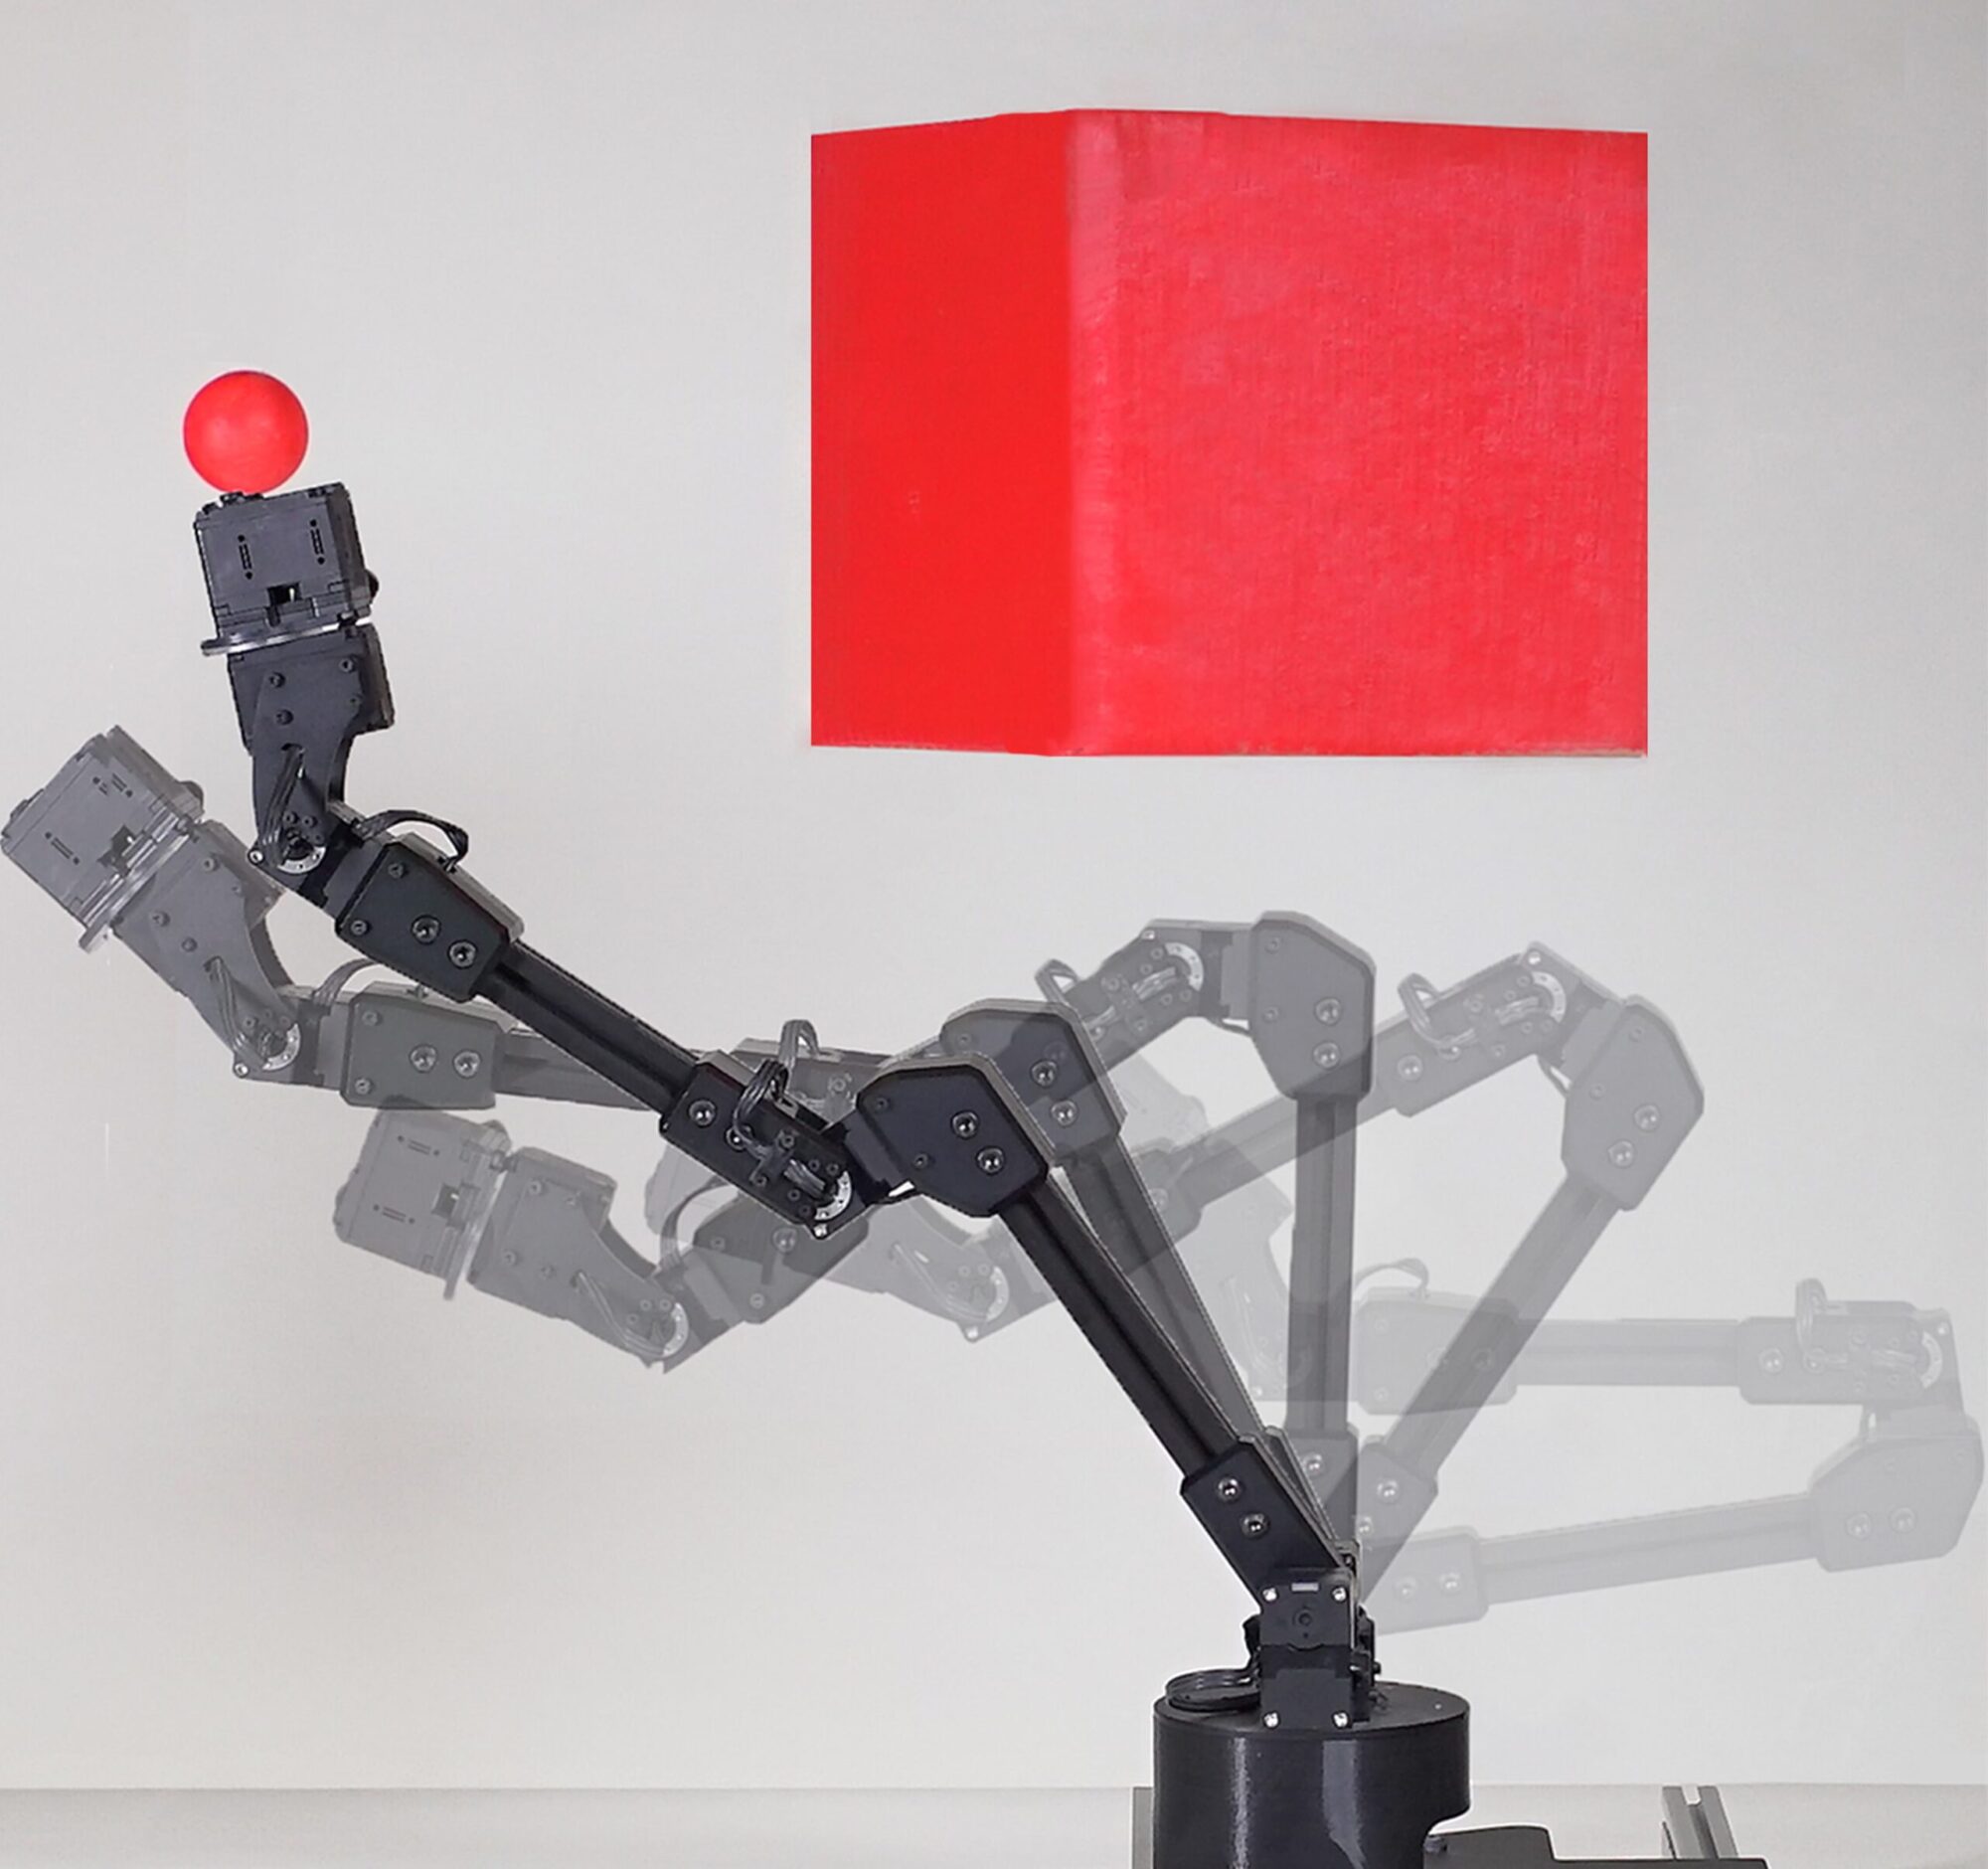 This robot is learning about its body to adapt to new tasks.